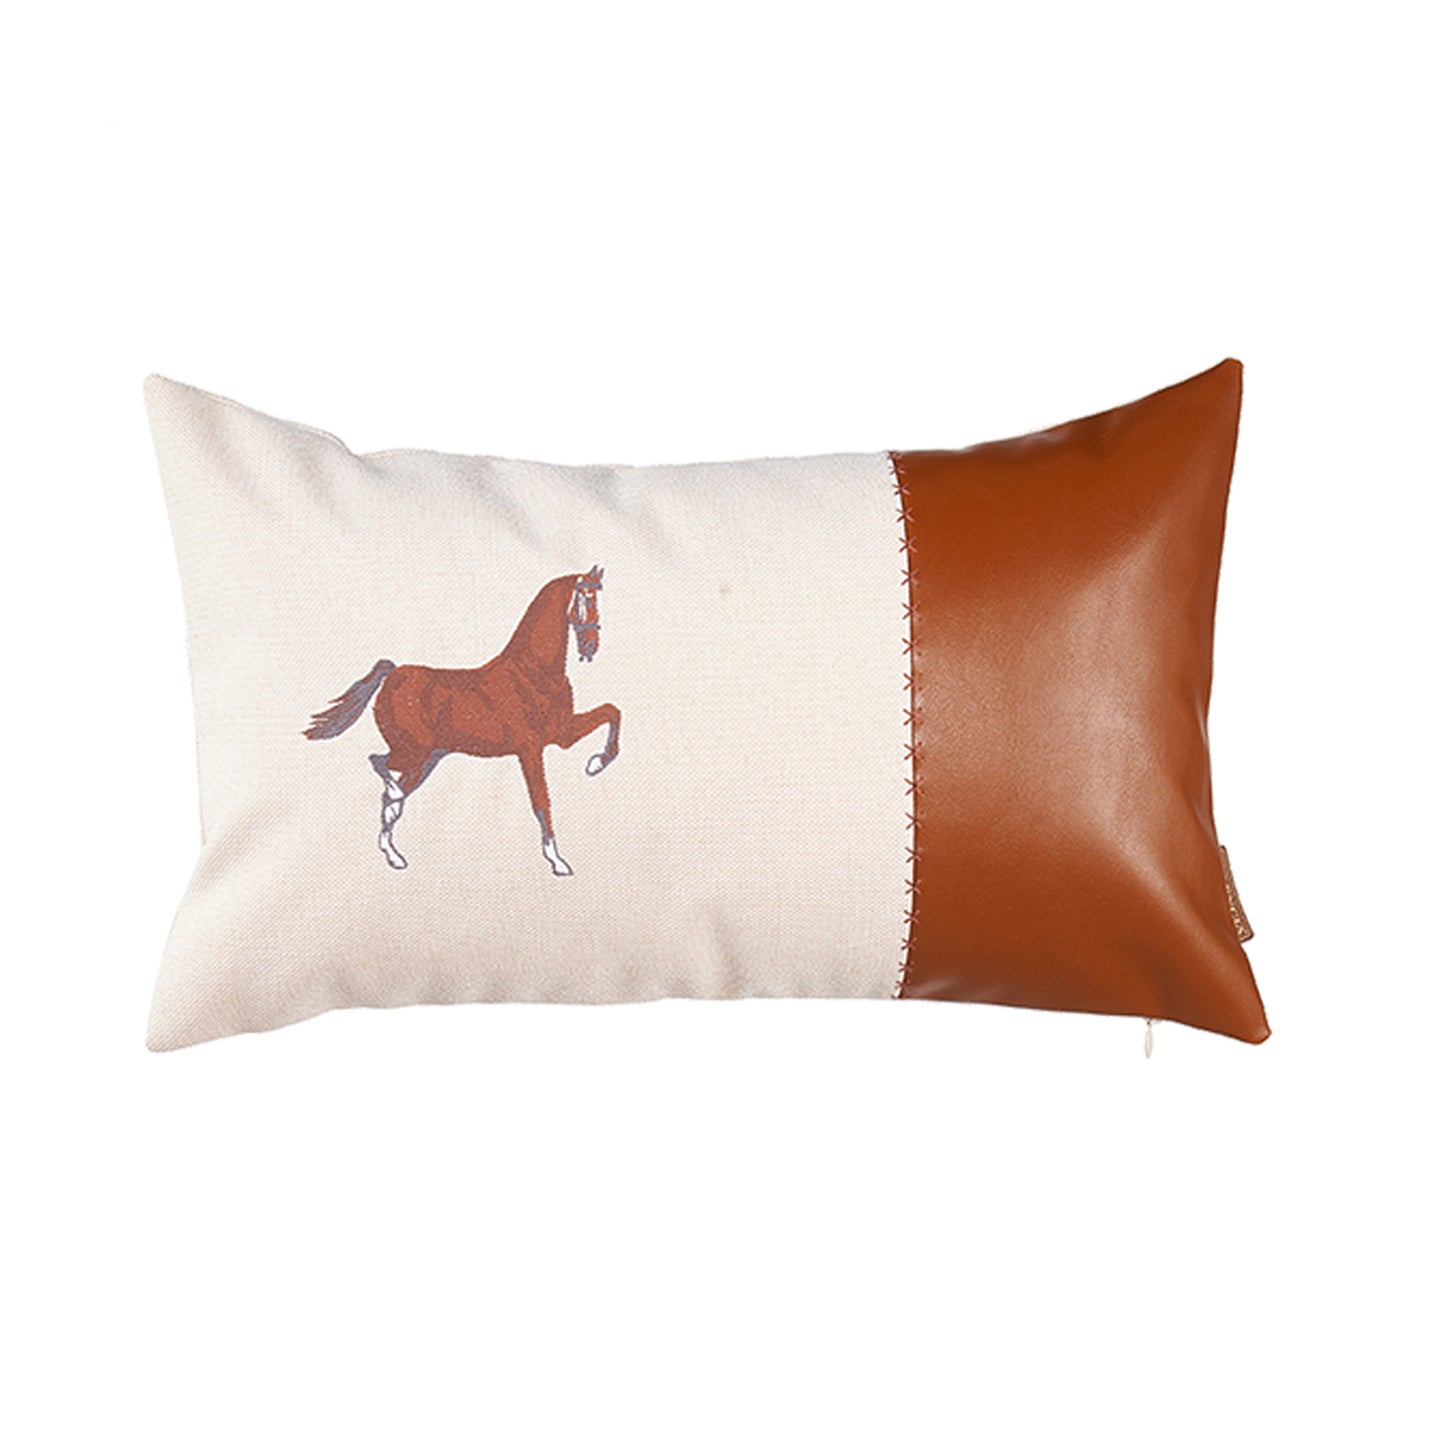 Boho Embroidered Horse Throw Pillow 12" x 20" Vegan Faux Leather Solid Beige & Brown Lumbar for Couch, Bedding